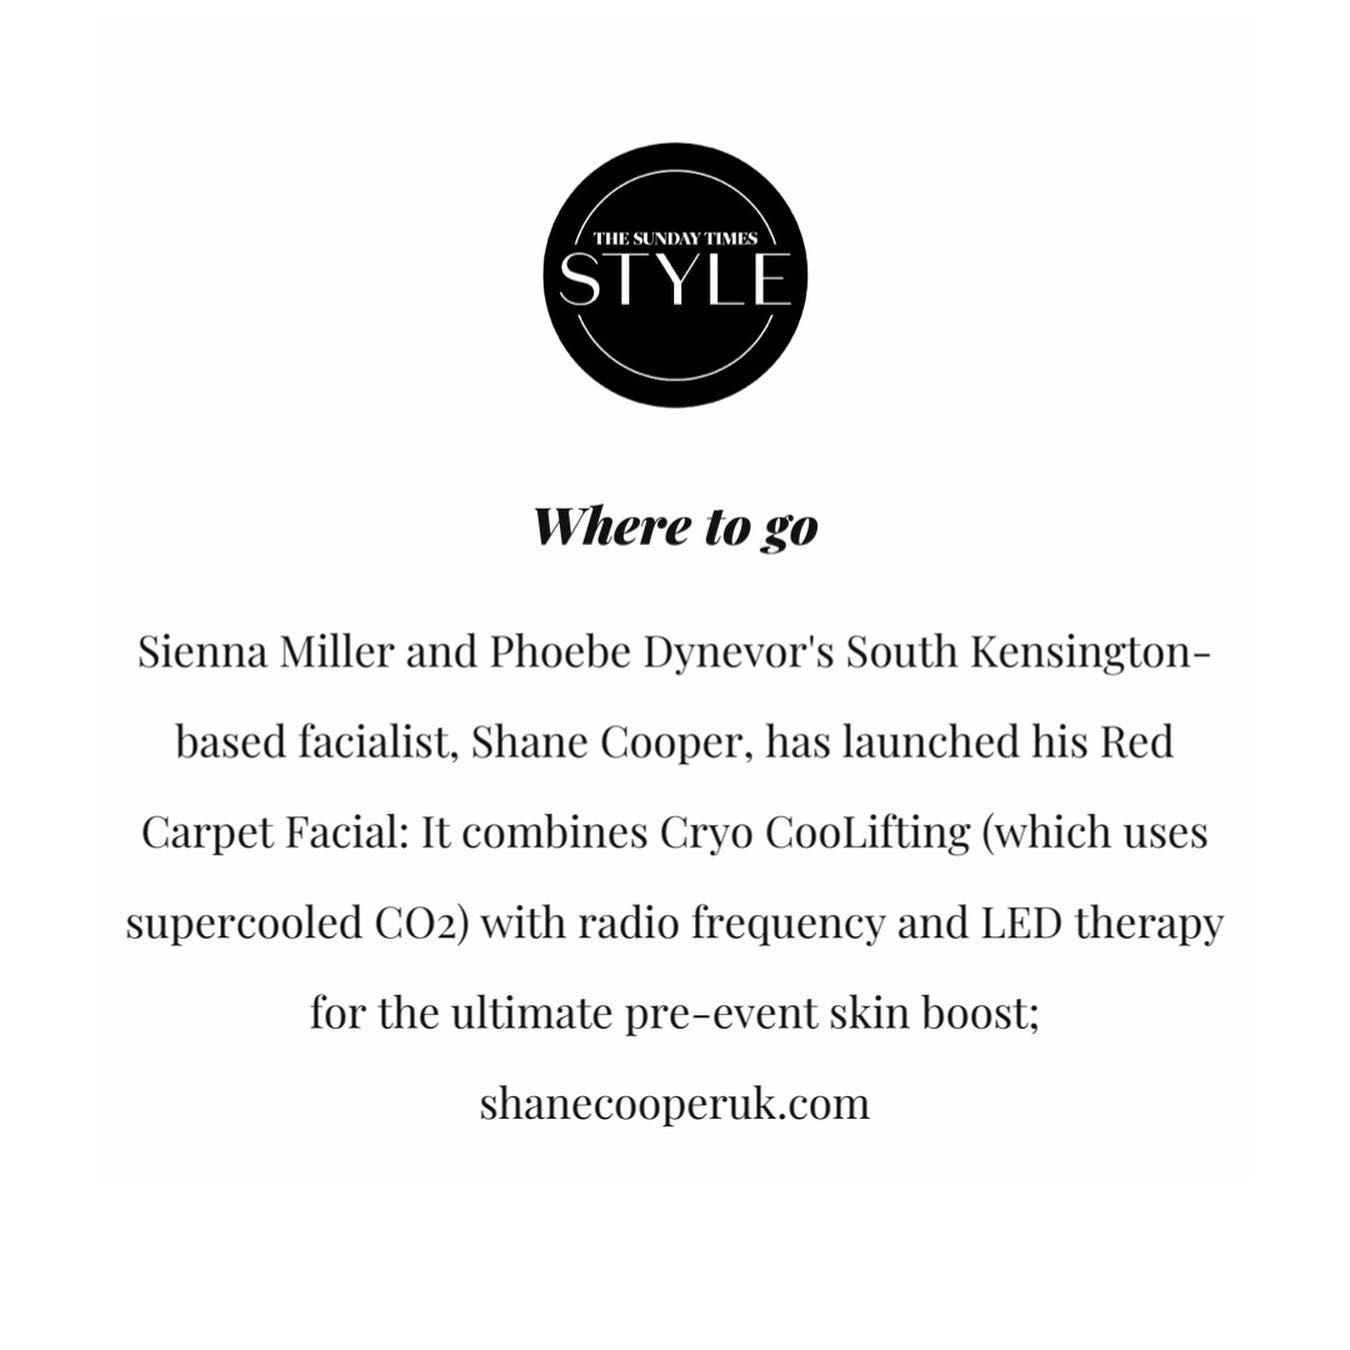 Shane Cooper facial featured in The Sunday Times Style